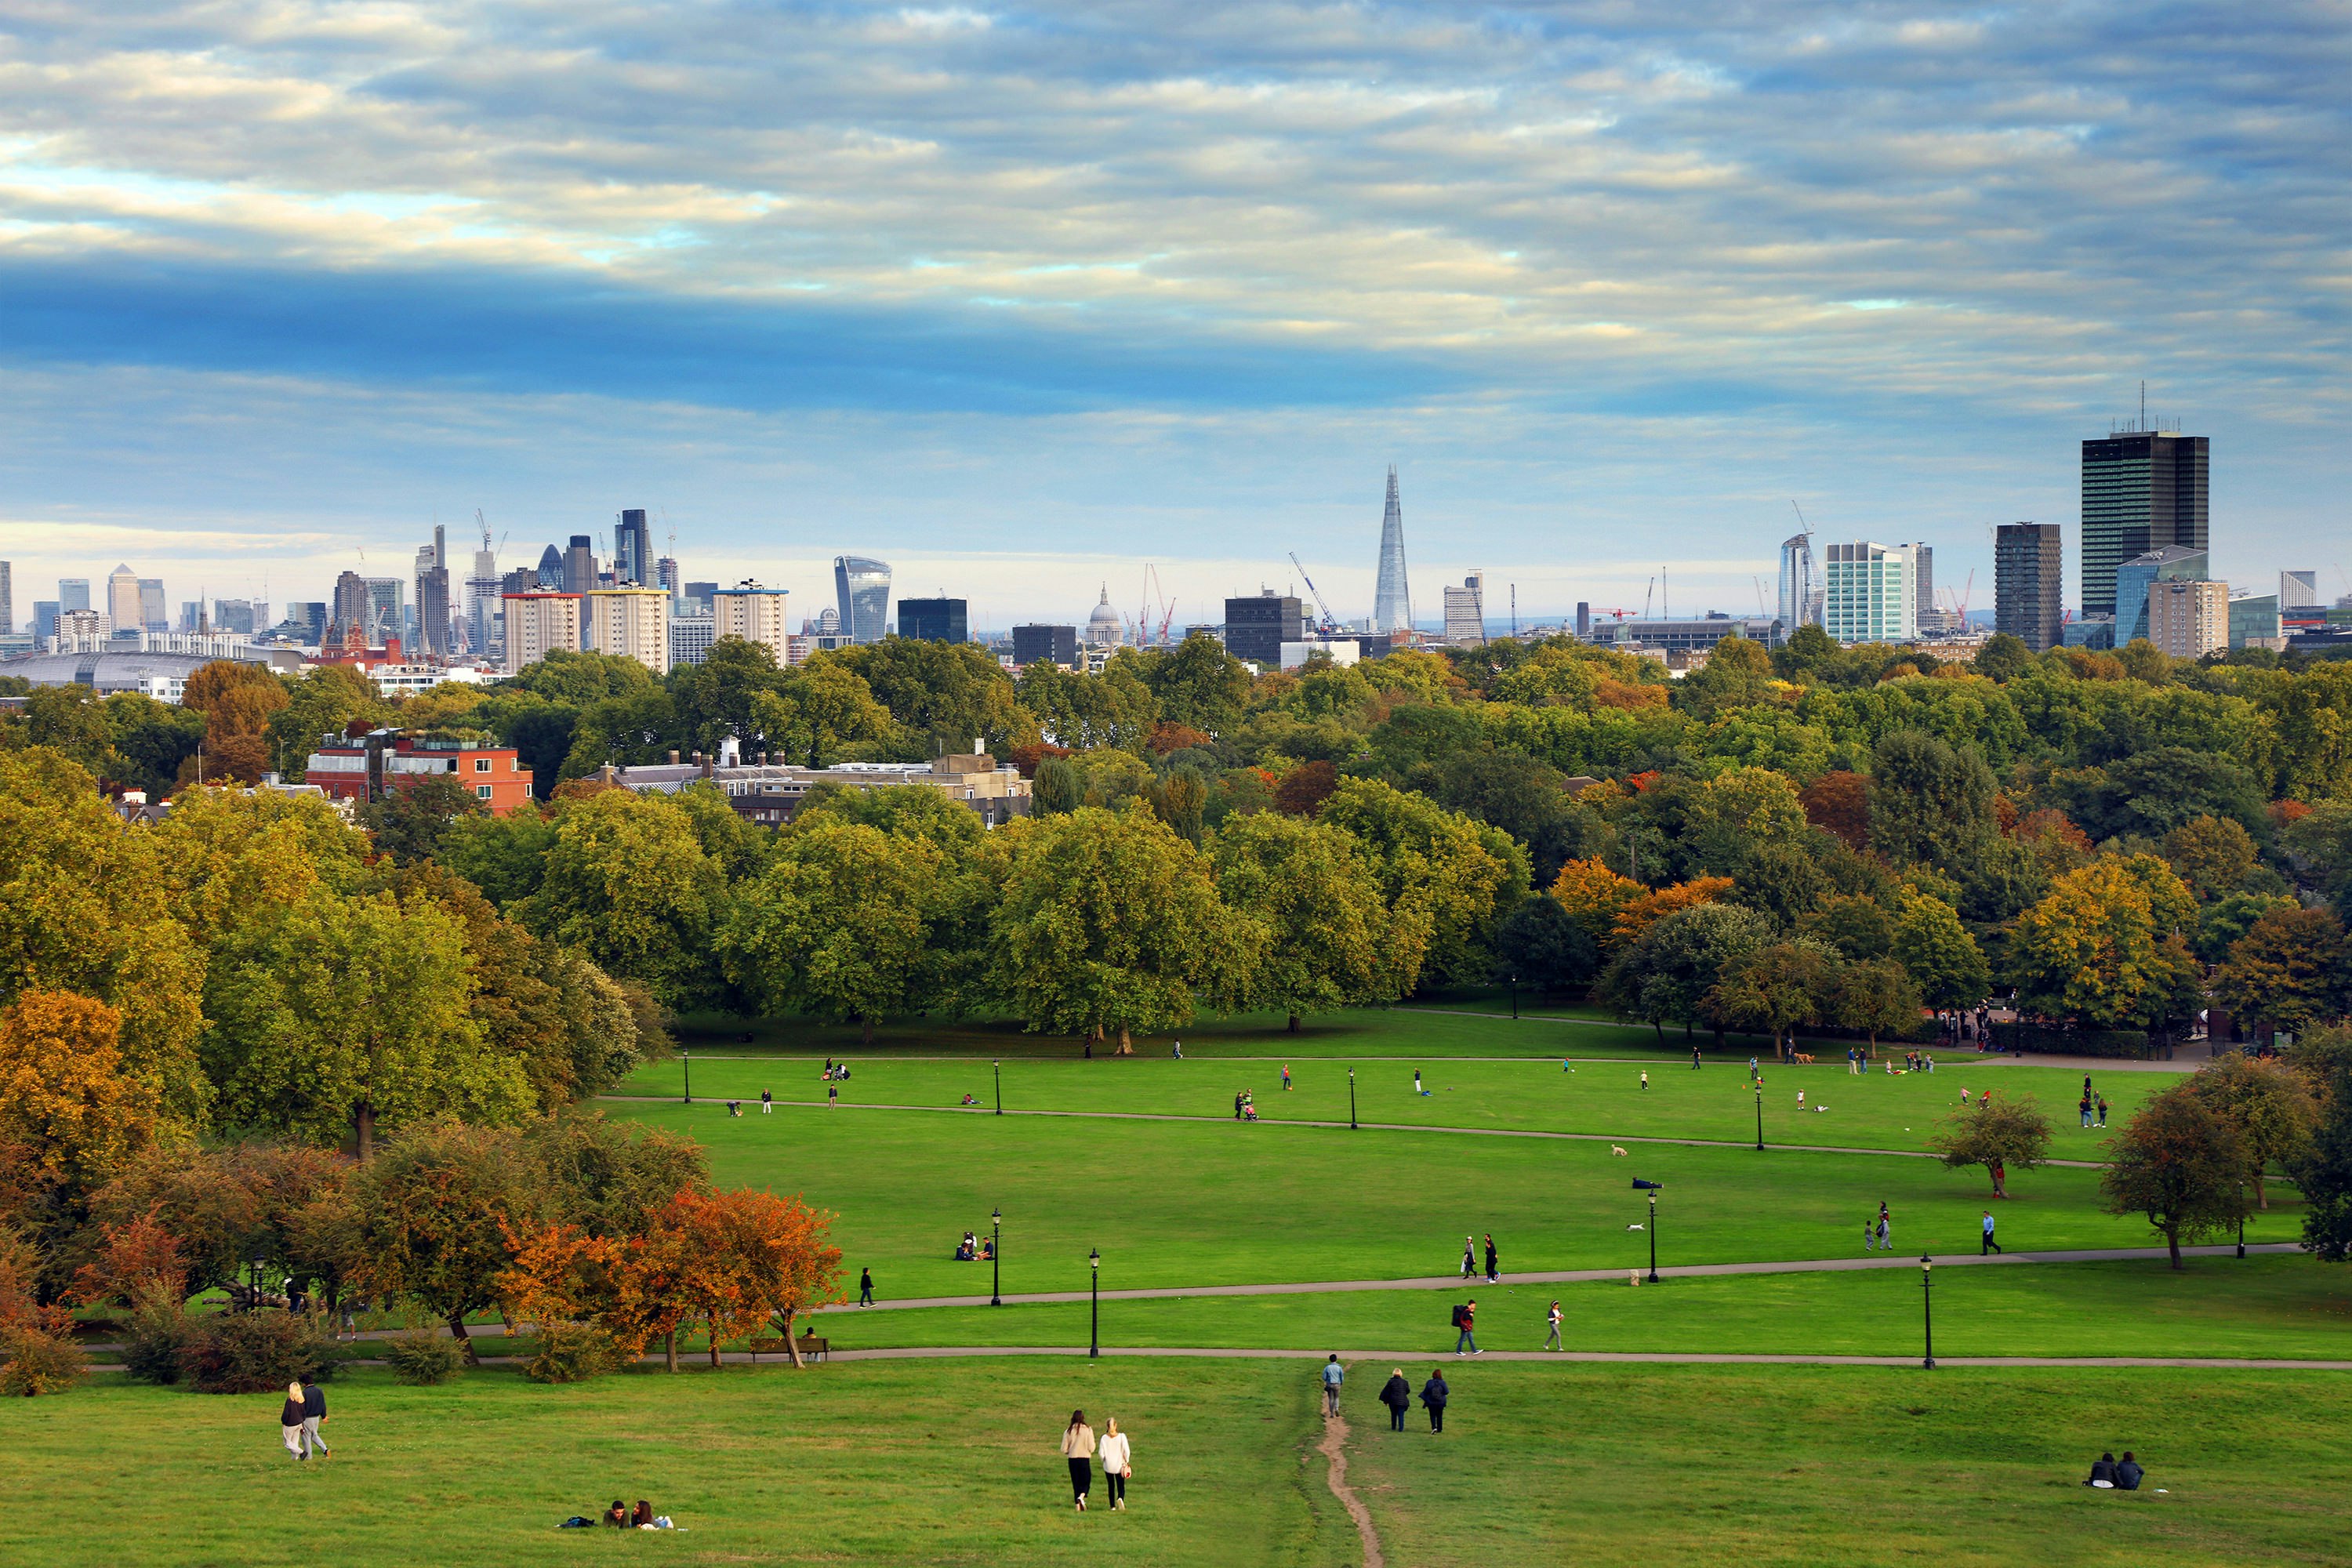 People walking on a green hillside, with trees and the London skyline in the background